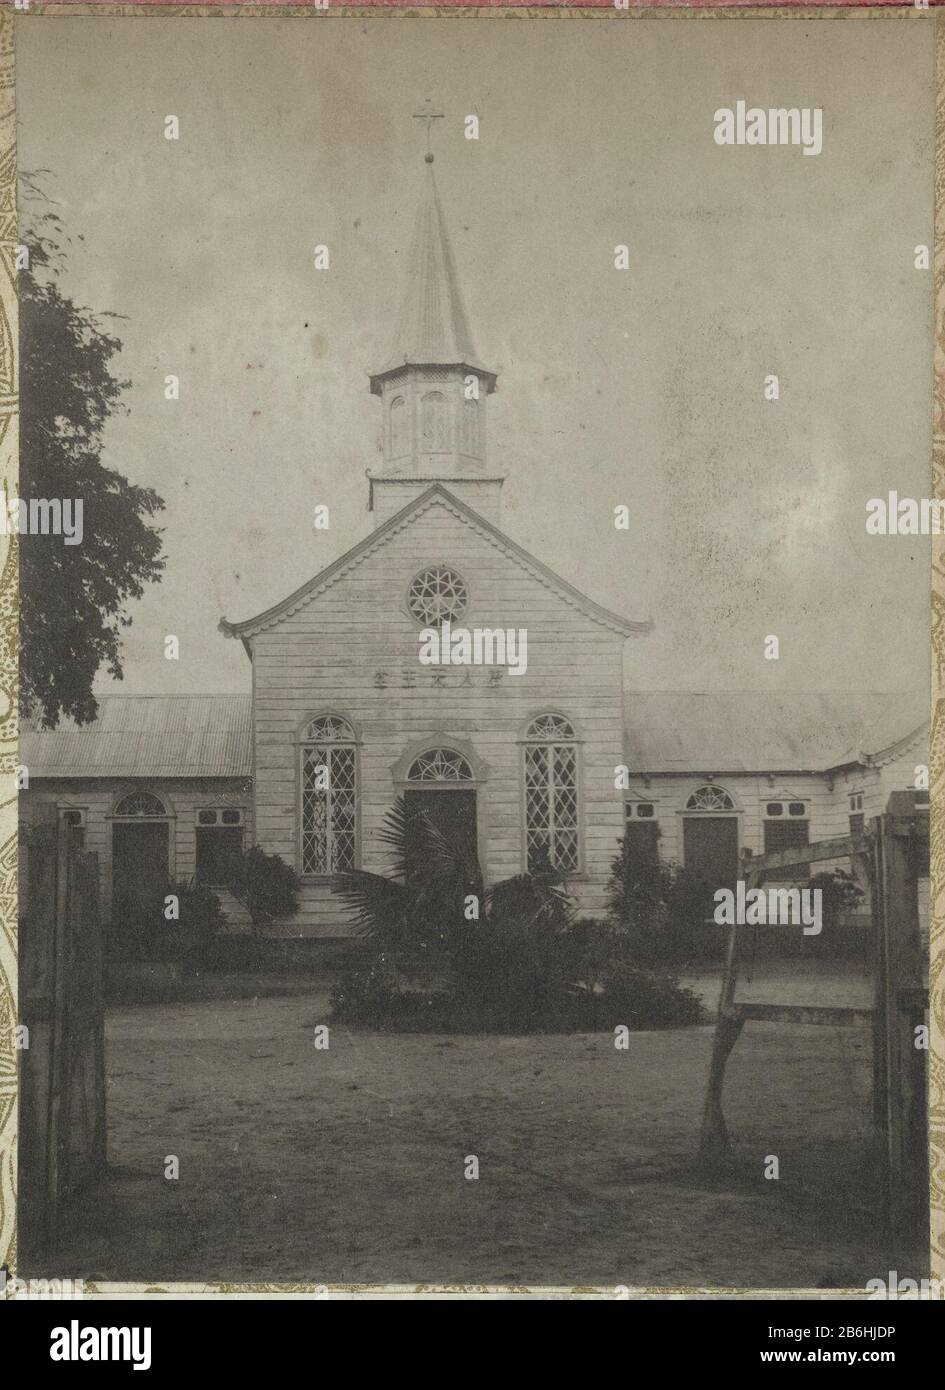 The Anthony Church for Chinese contract laborers in the Burenstraat Paramaribo. Part of the album Souvenir de Voyage (Part 1), about the life of the family Doijer in and around the plantation Ma Retraite in Suriname during the years 1906-1913 Manufacturer : Photographer: Hendrik Doijer (attributed to) Place manufacture: Suriname Date: 1906 - 1913 Physical features: gelatin silver print material: paper Technique: gelatin silver print dimensions: photo: h 112 mm × W 80 mm Date: 1906 - 1913 Stock Photo